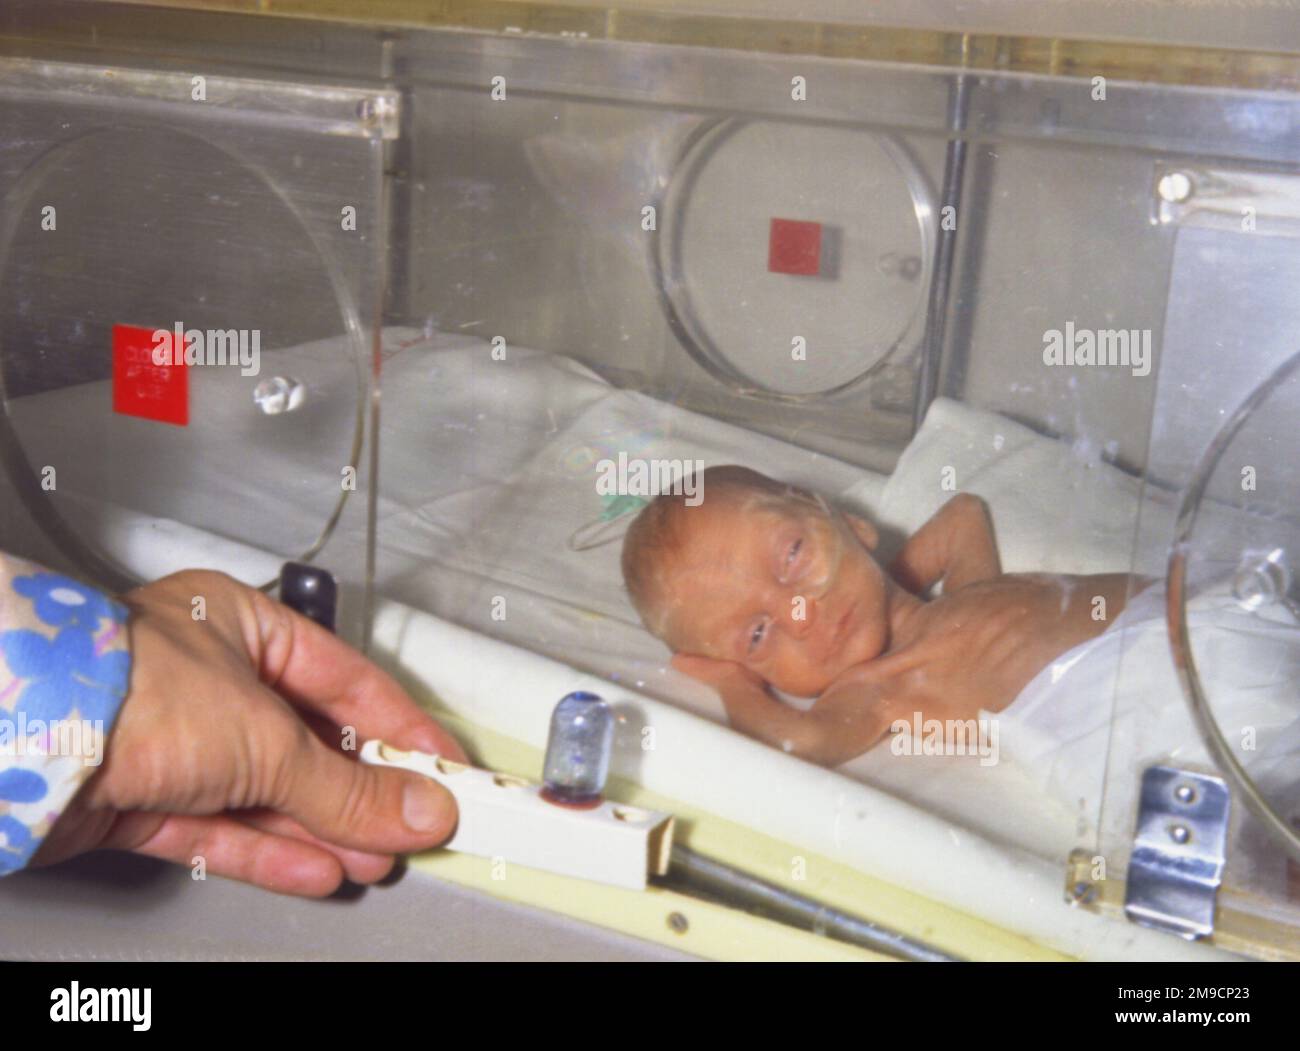 A premature baby girl in an incubator at Redhill Hospital, Surrey. Stock Photo